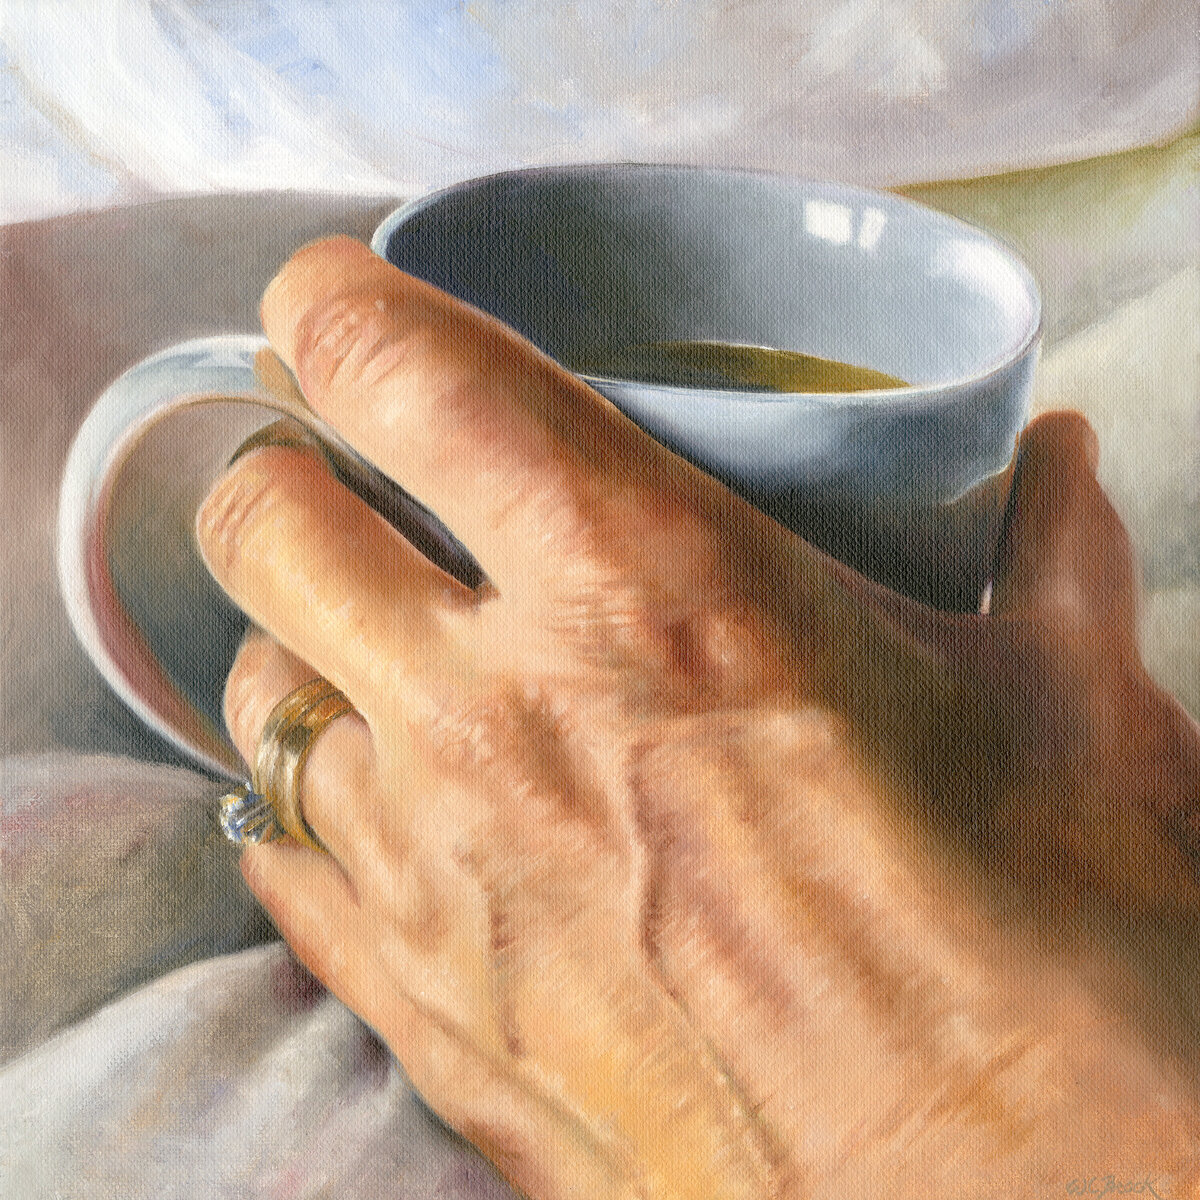 First Cup_8x8_1